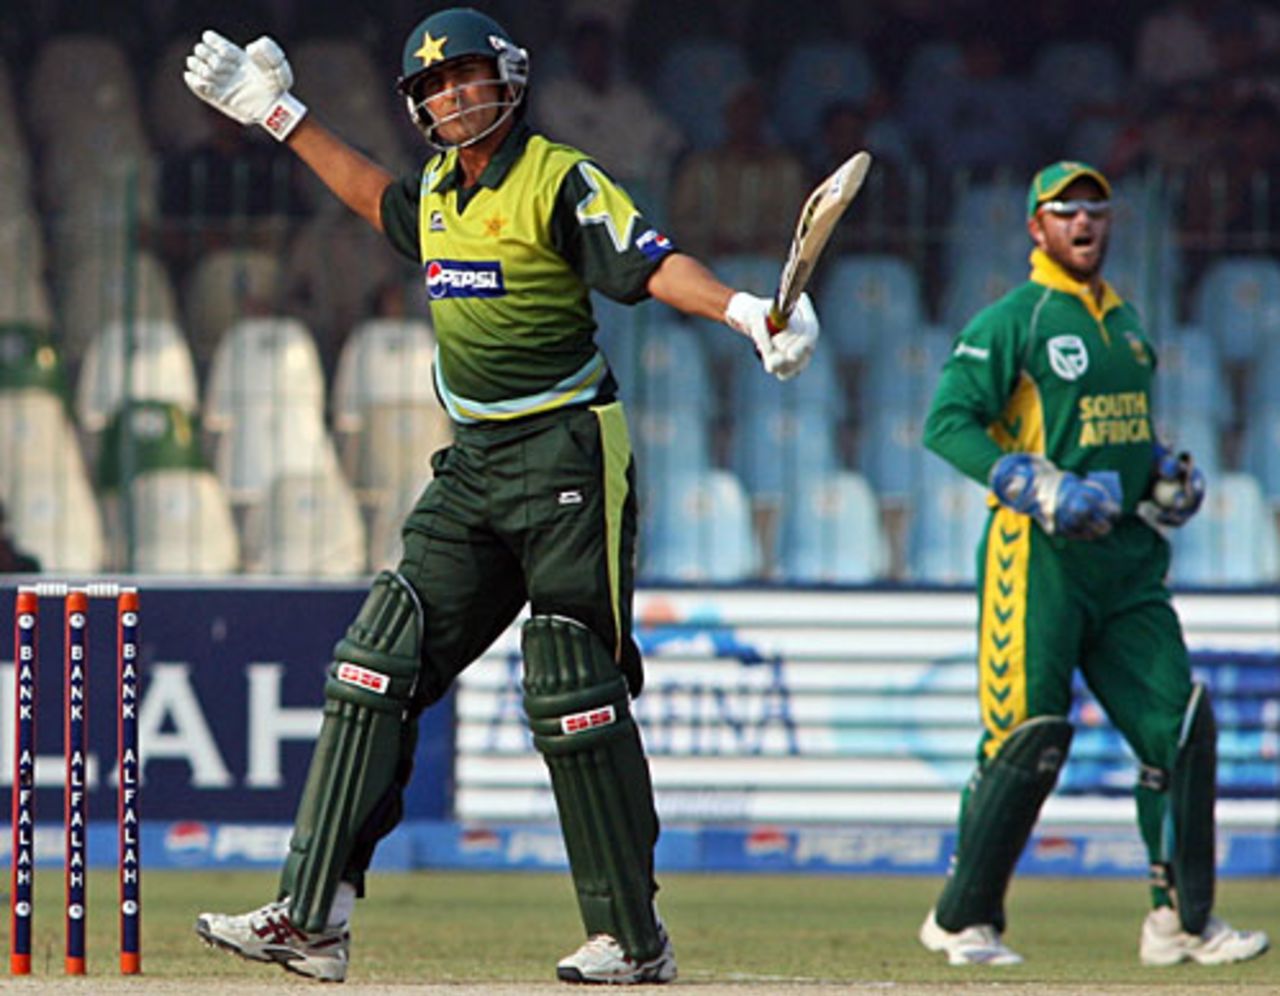 Younis Khan was caught behind by Mark Boucher for 12, Pakistan v South Africa, 1st ODI, Lahore, October 18, 2007